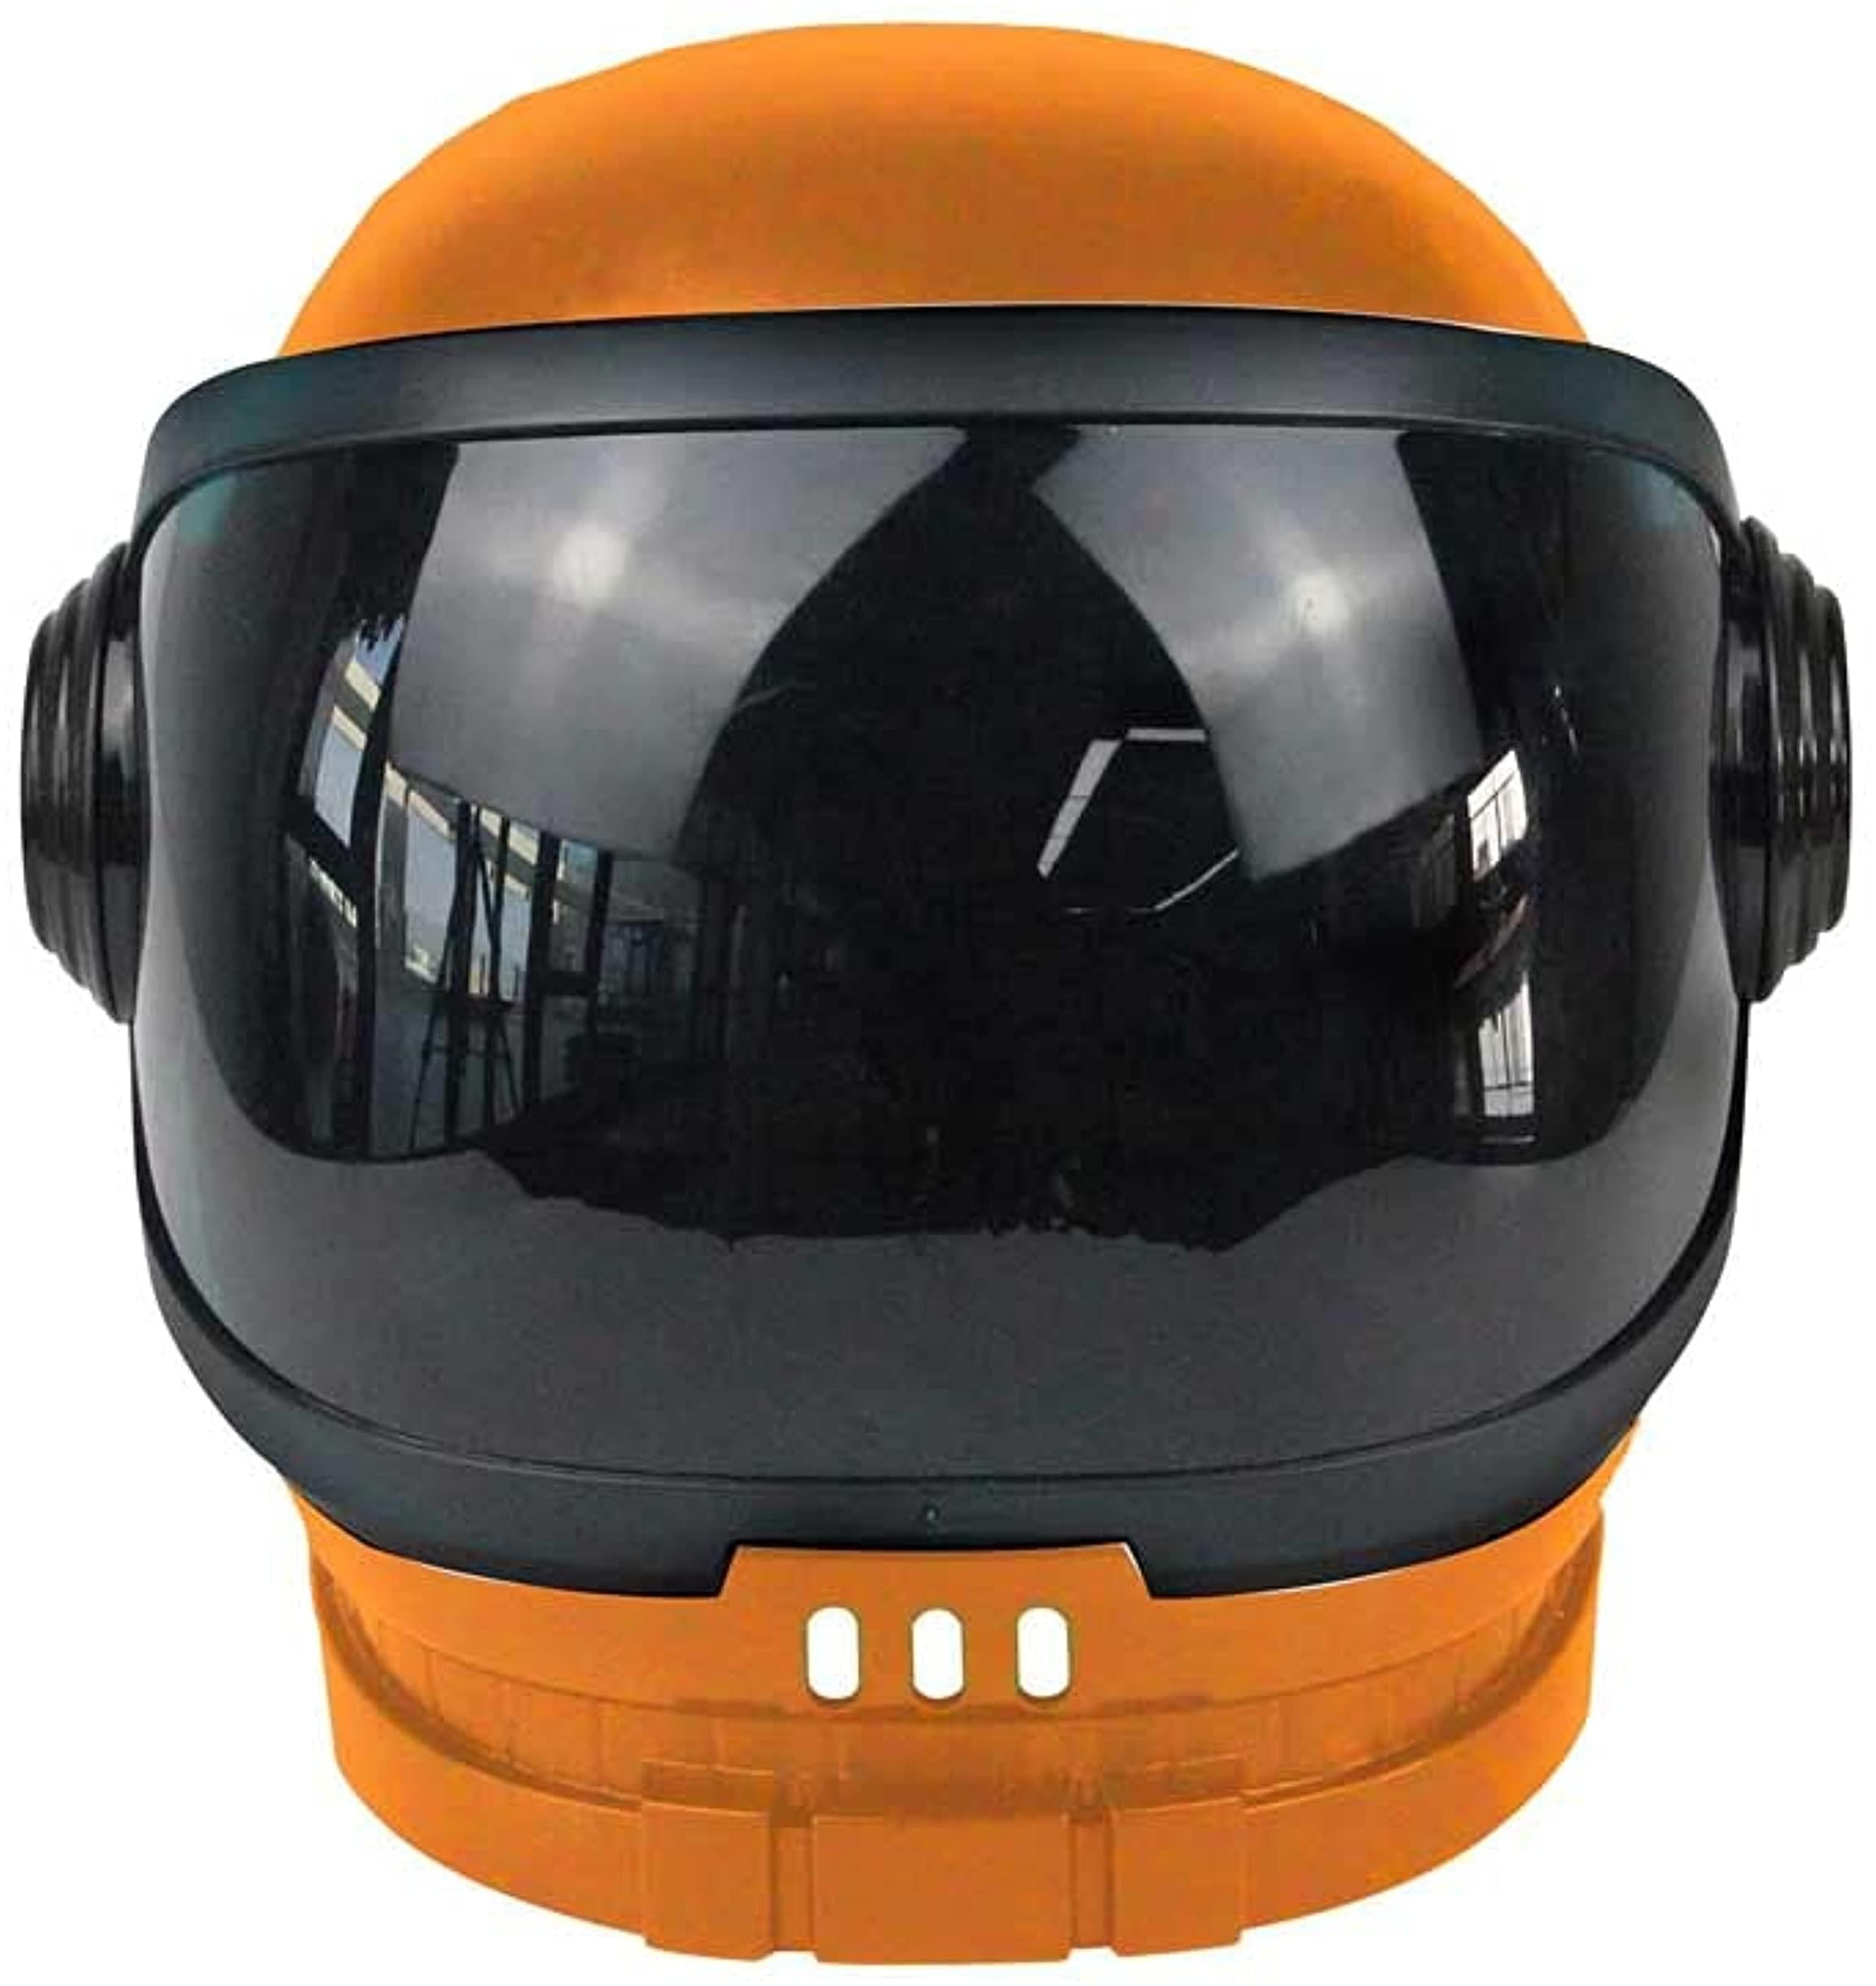 Aeromax Youth Astronaut Helmet With Movable Visor Orange 2day Ship for sale online 